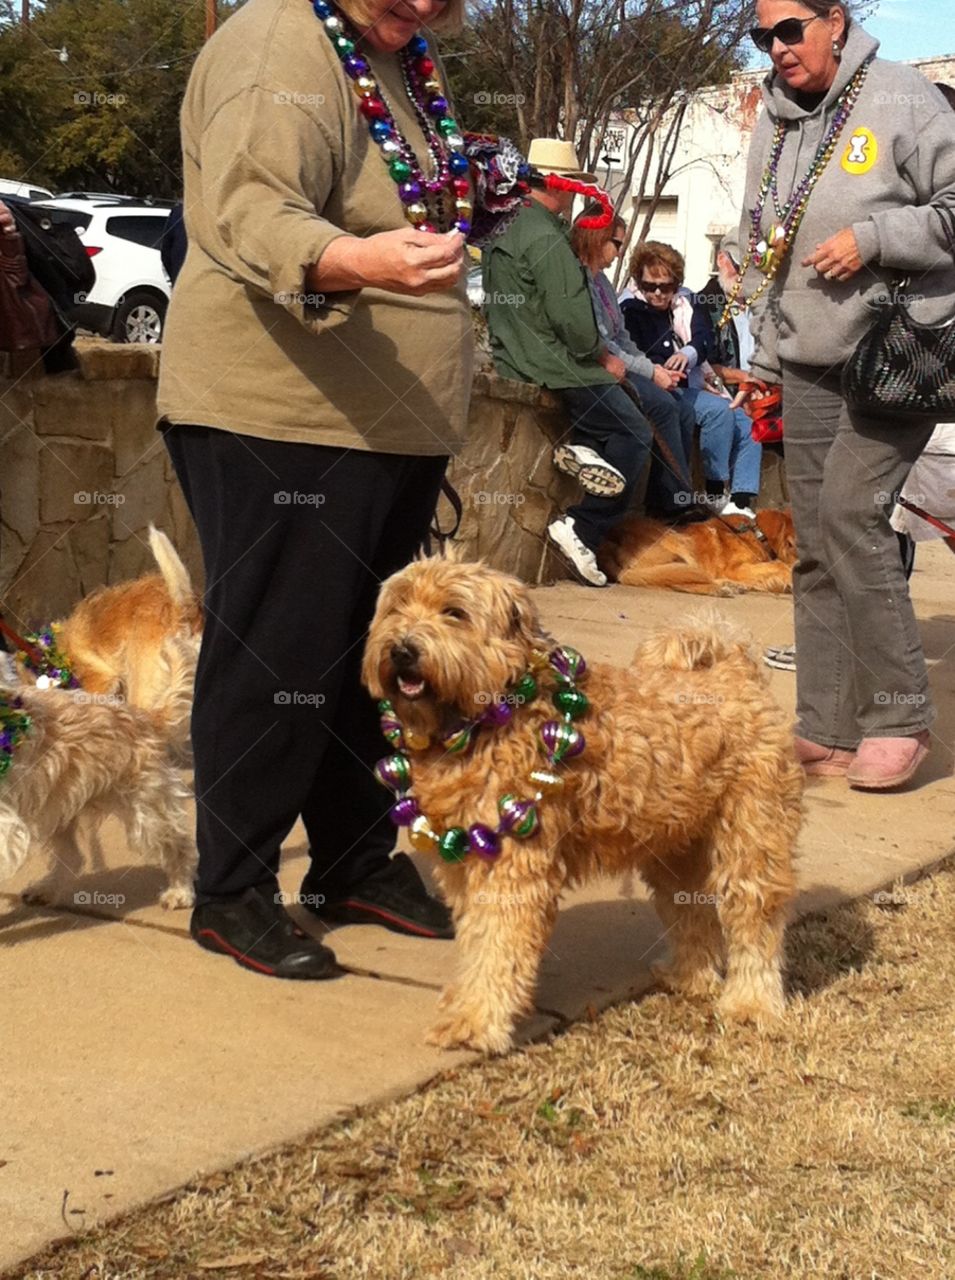 Dog day parade, McKinney, Texas, dawgy, cute, furry, pet, canine, curly, scruffy, mutt, cur, play, leash, schnoodle, doodle, terrior, pounce, dog park, Halloween, dog costume, adorned, fall, awesome, community, event, families, fun, silly, whimsical